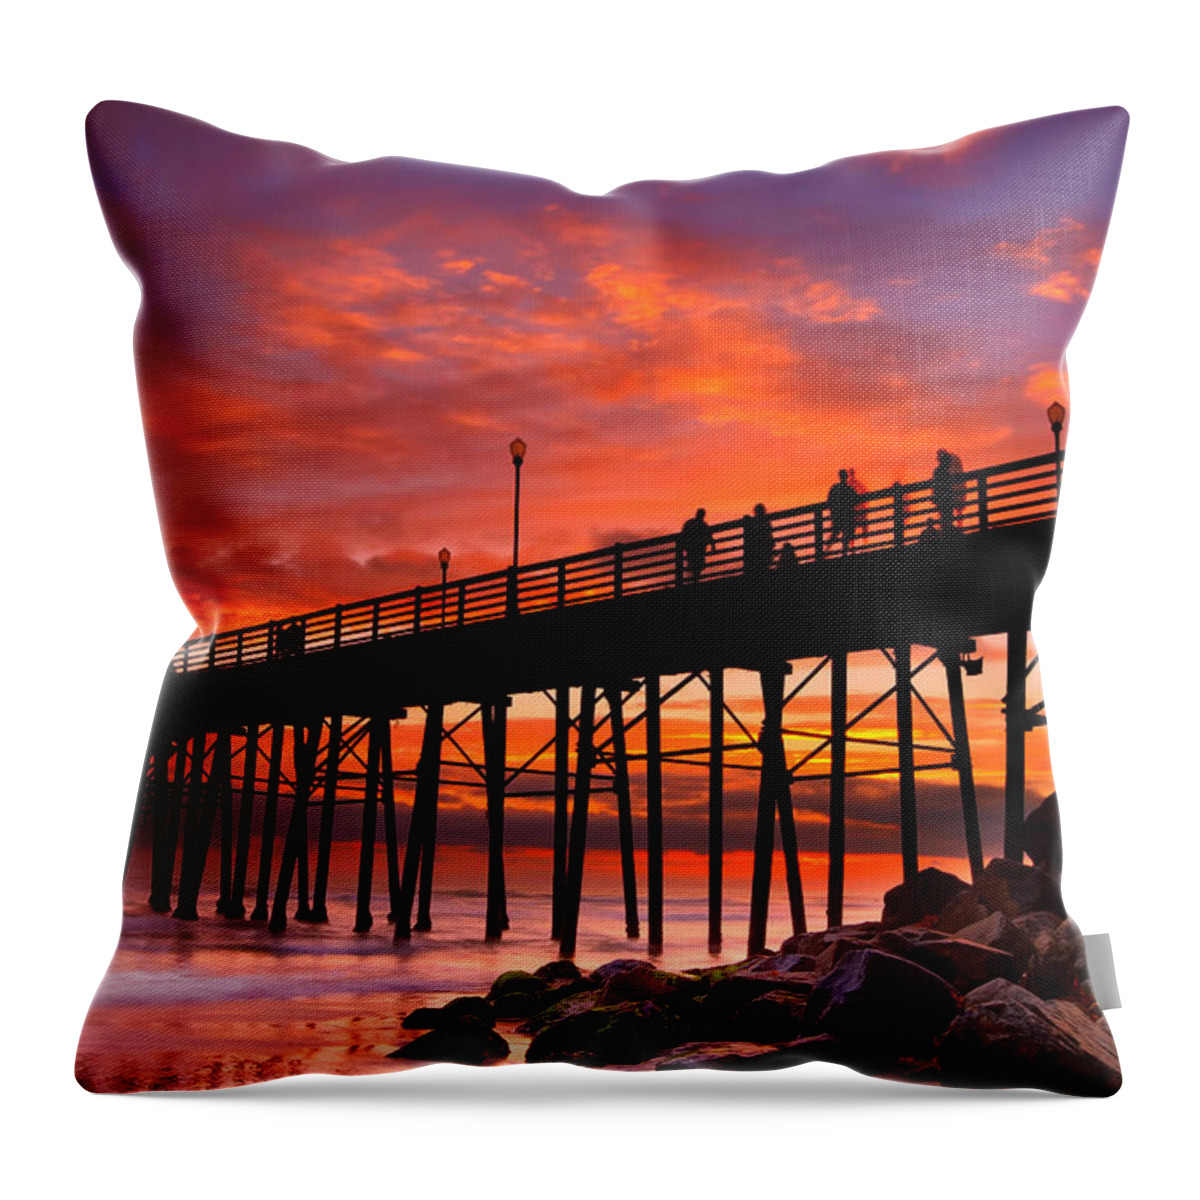 Sunset Throw Pillow featuring the photograph Oceanside Sunset 12 by Larry Marshall